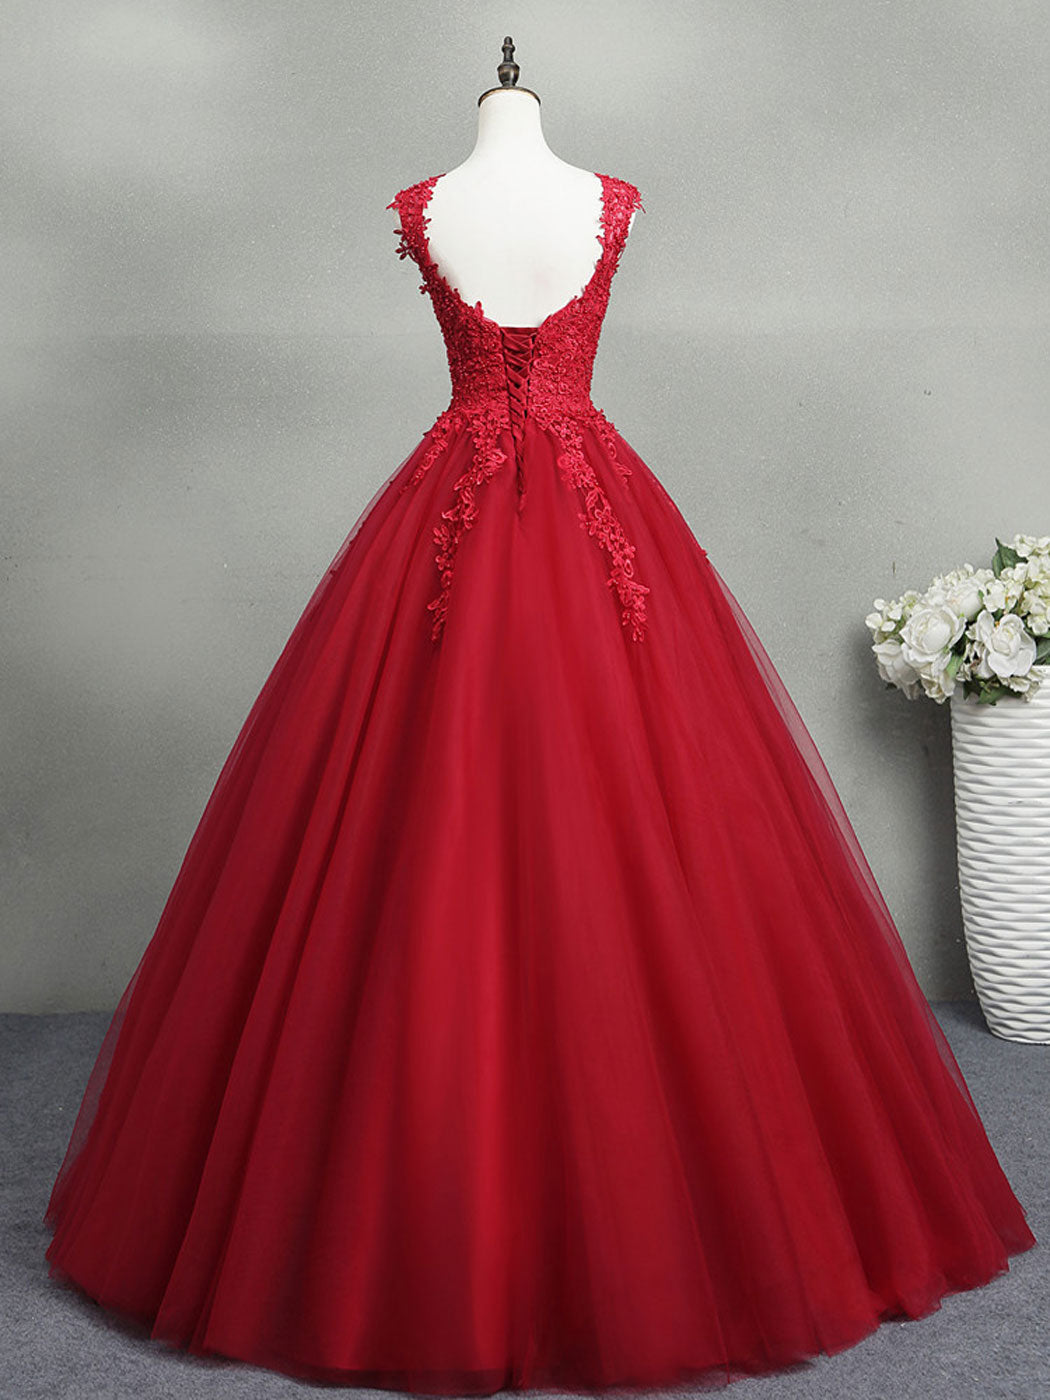 Red Queen Anne Lace Top Backless Ball Gown Prom Dress  - DollyGown